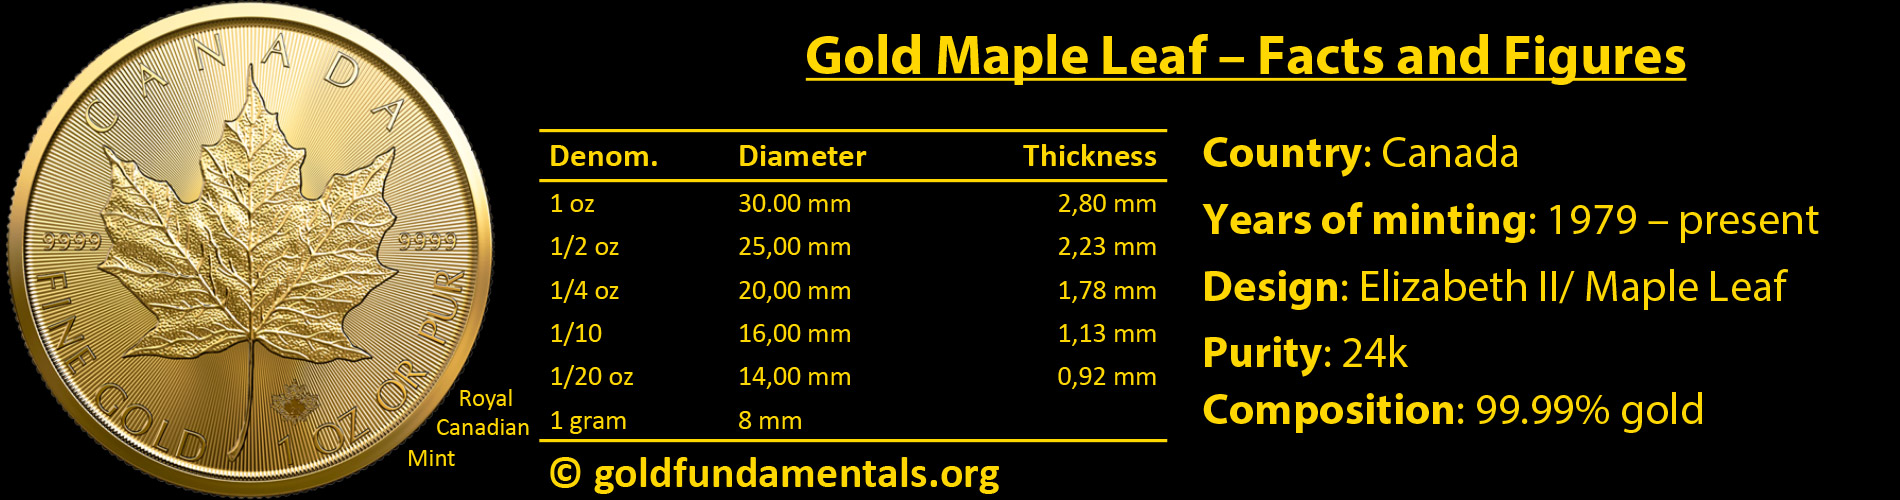 Gold Maple Leaf: Facts and Figures.